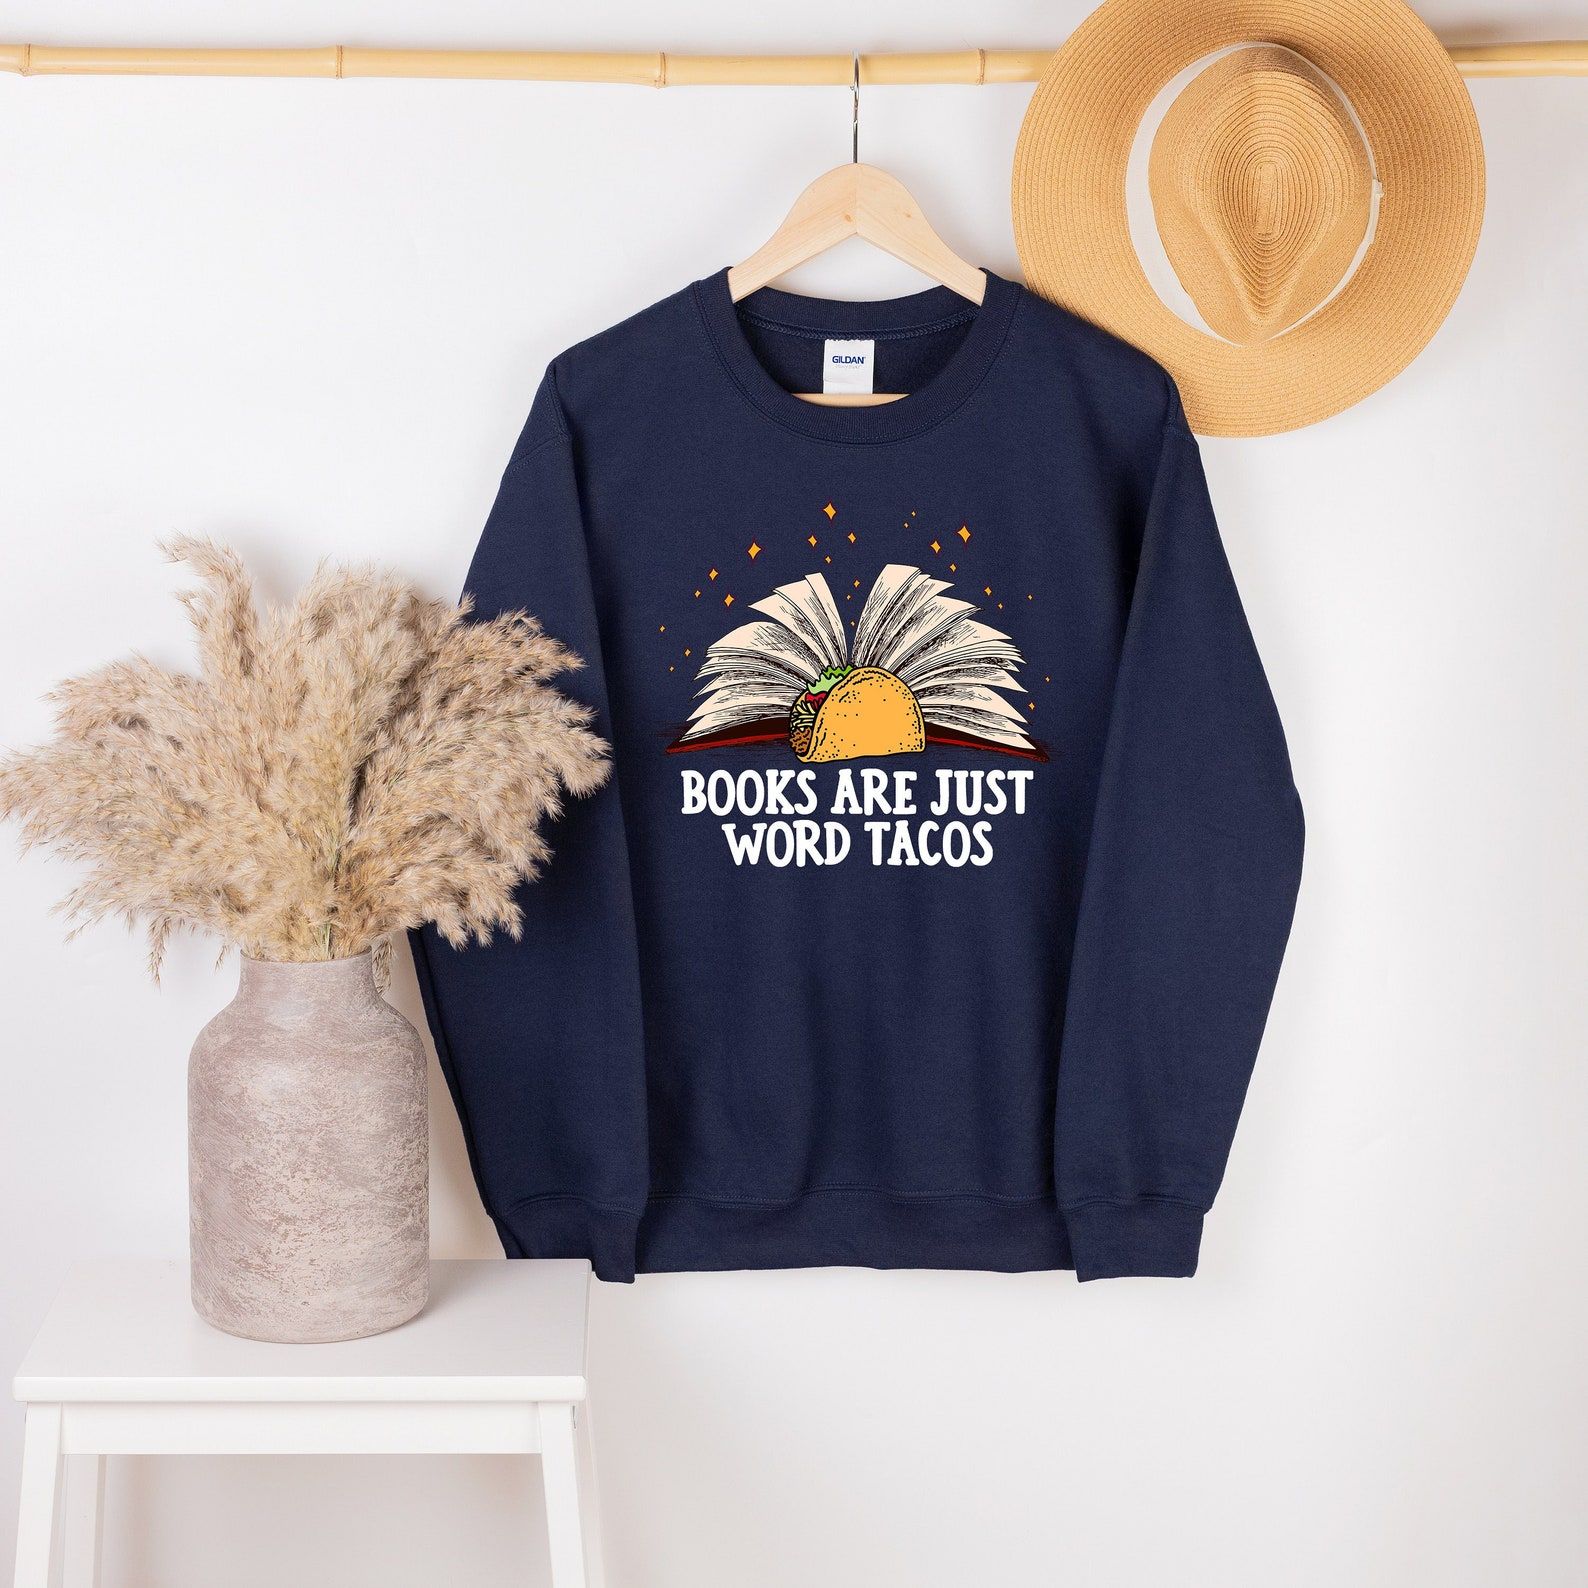 Navy sweatshirt hanging on a white wall. The sweatshirt has white text which reads "books are just word tacos," with a taco above it and a book behind the taco. The book is open. 